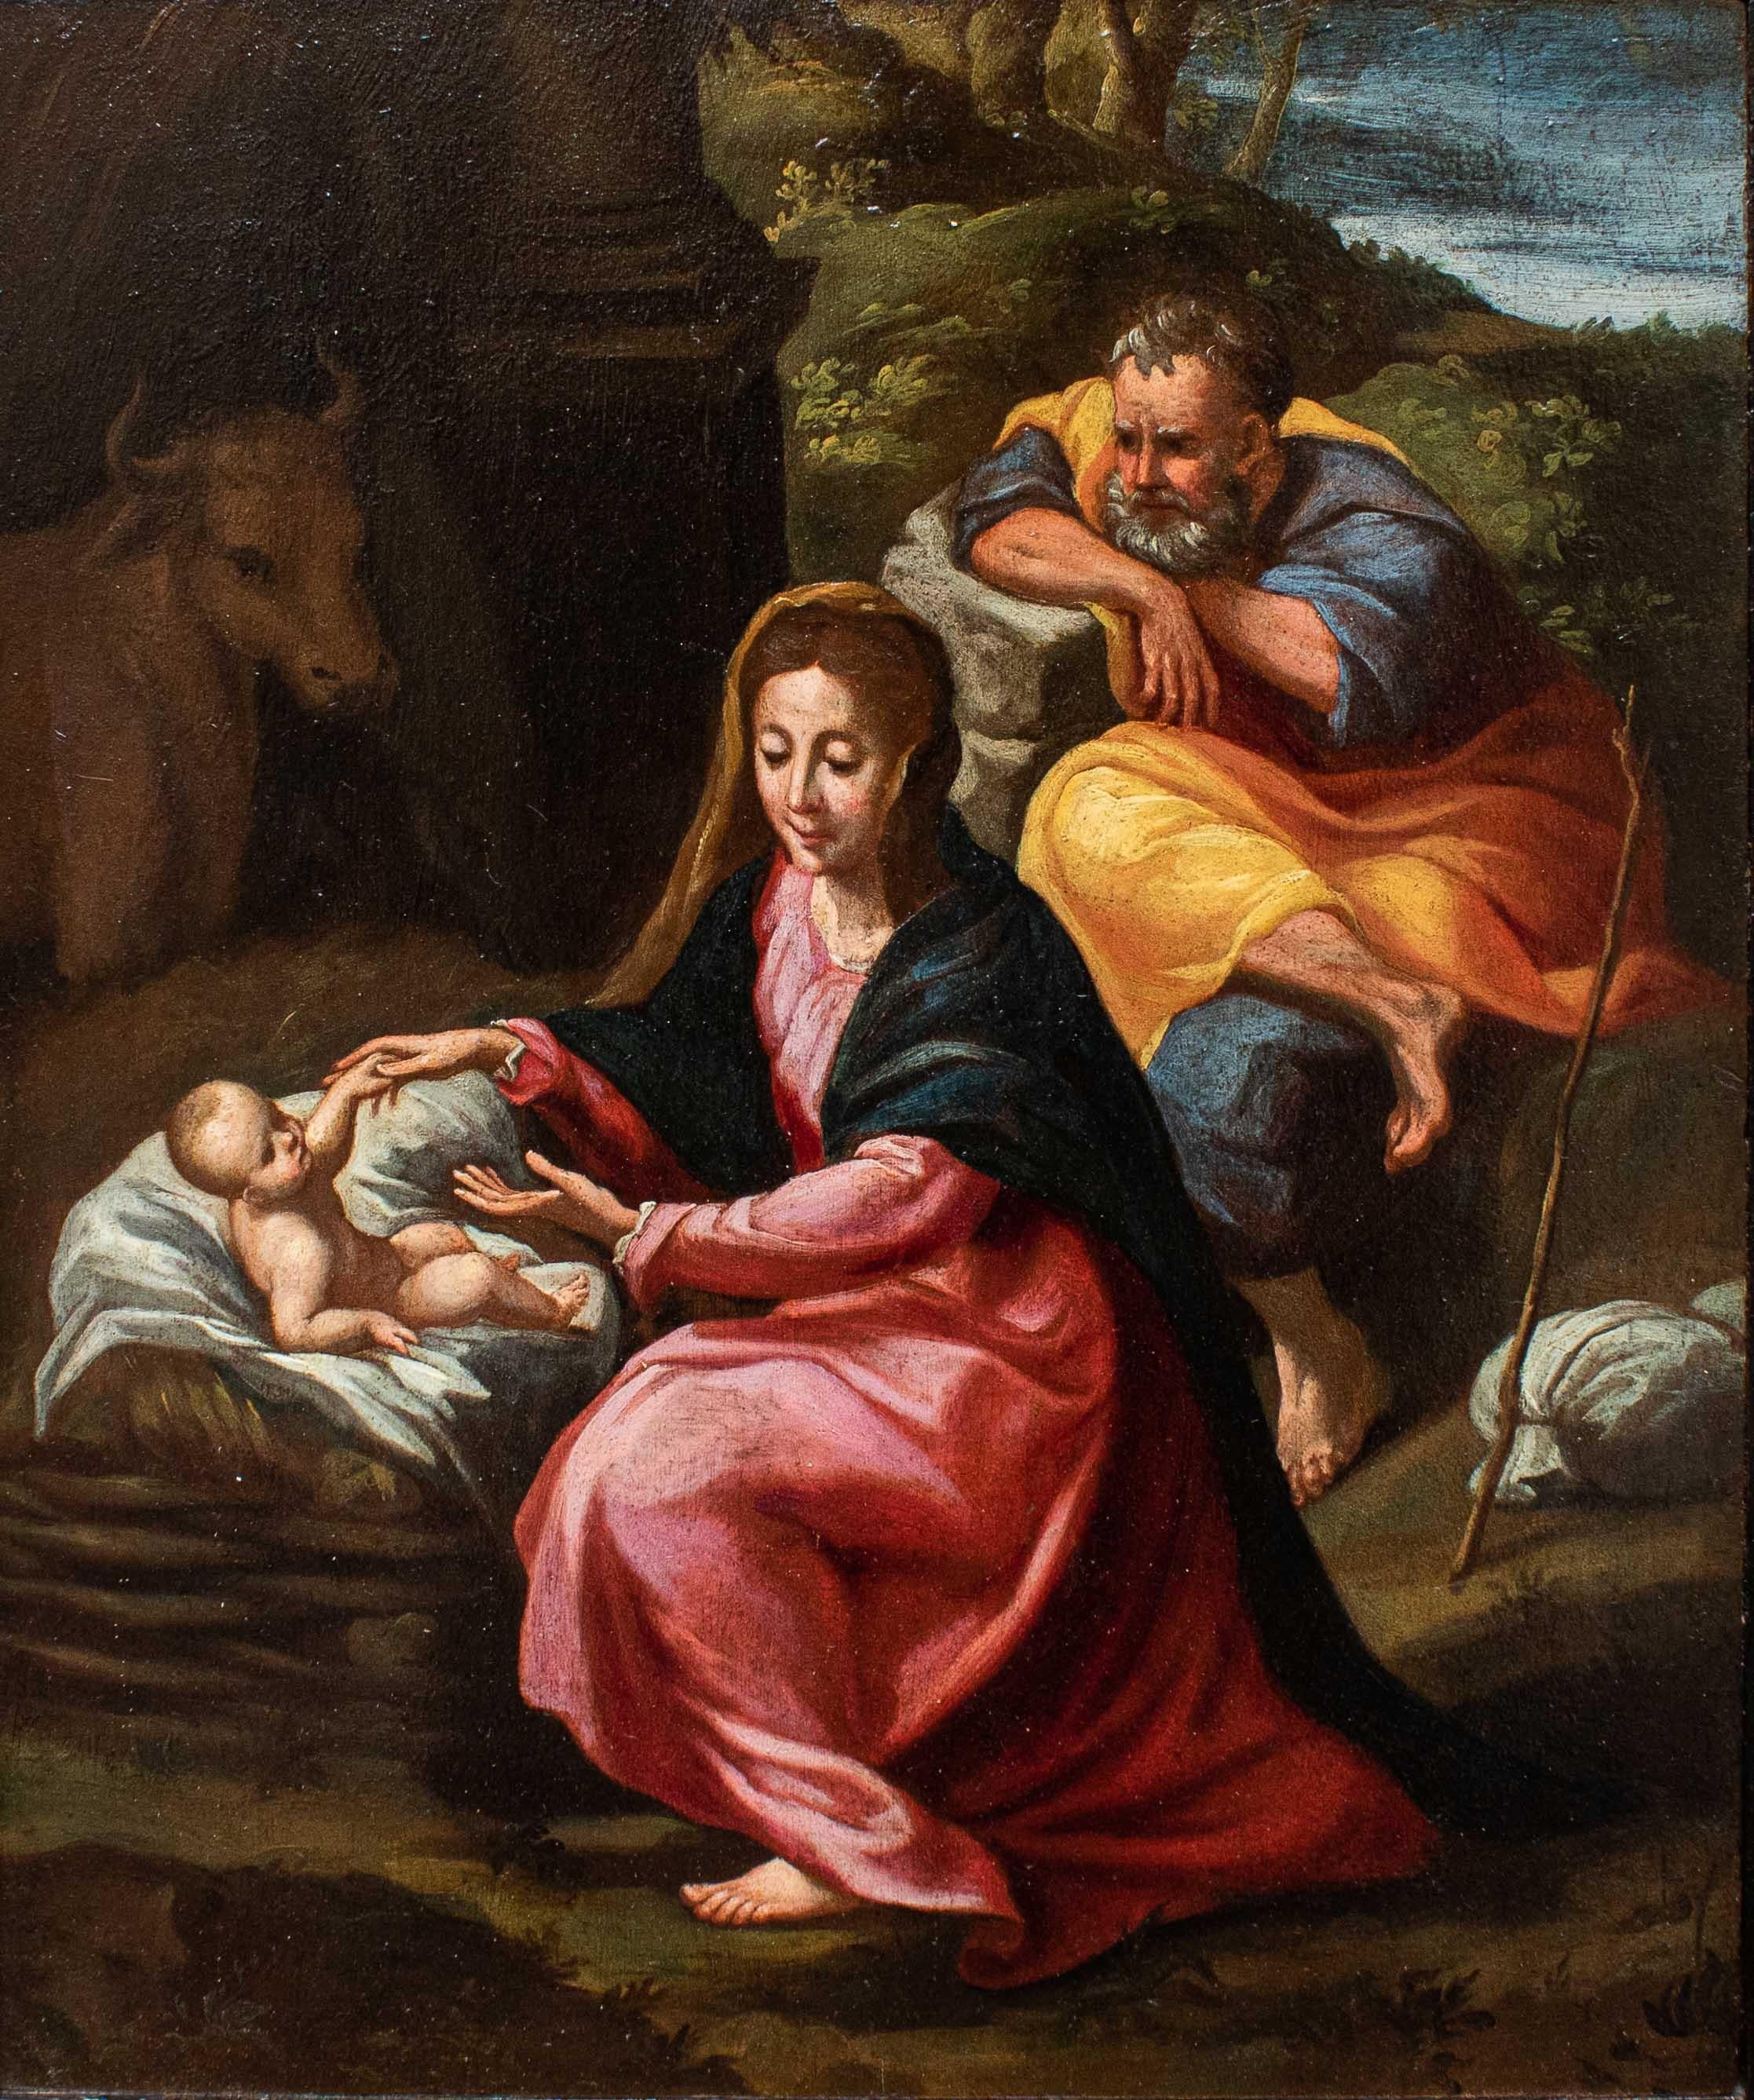 17th century, Emilian school, Pamigianino painter
Rest on the flight to Egypt
Oil on panel, 46 x 39 cm - with frame 55.5 x 48.5 cm

The work in question depicts the episode of the flight into Egypt of the Holy Family, one of the most loved and